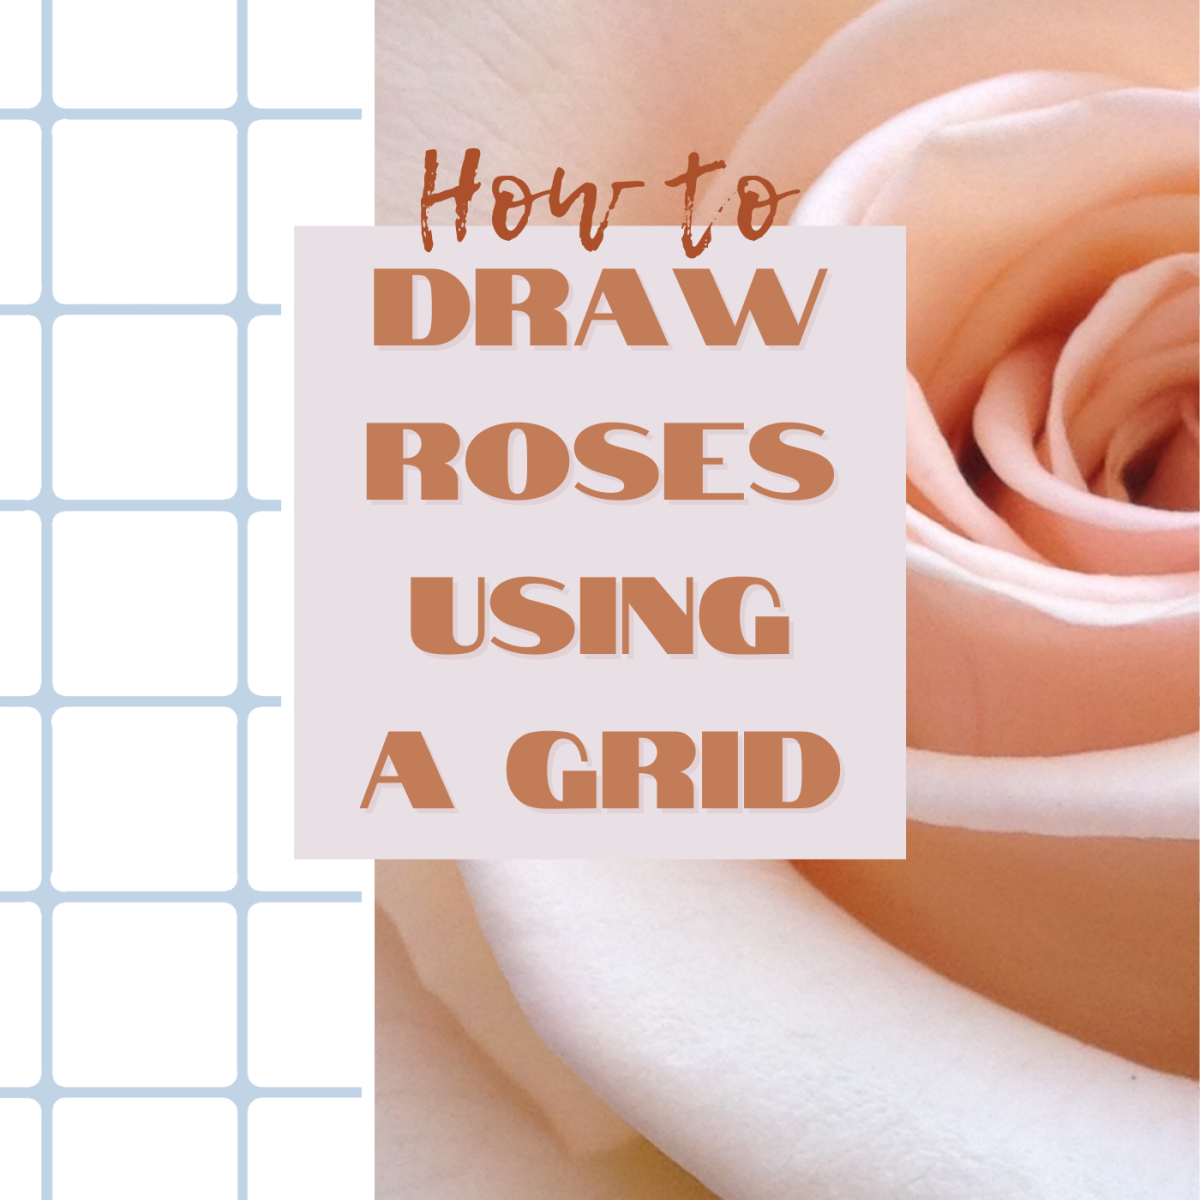 How to Draw a Rose Using a Grid (Step-by-Step)